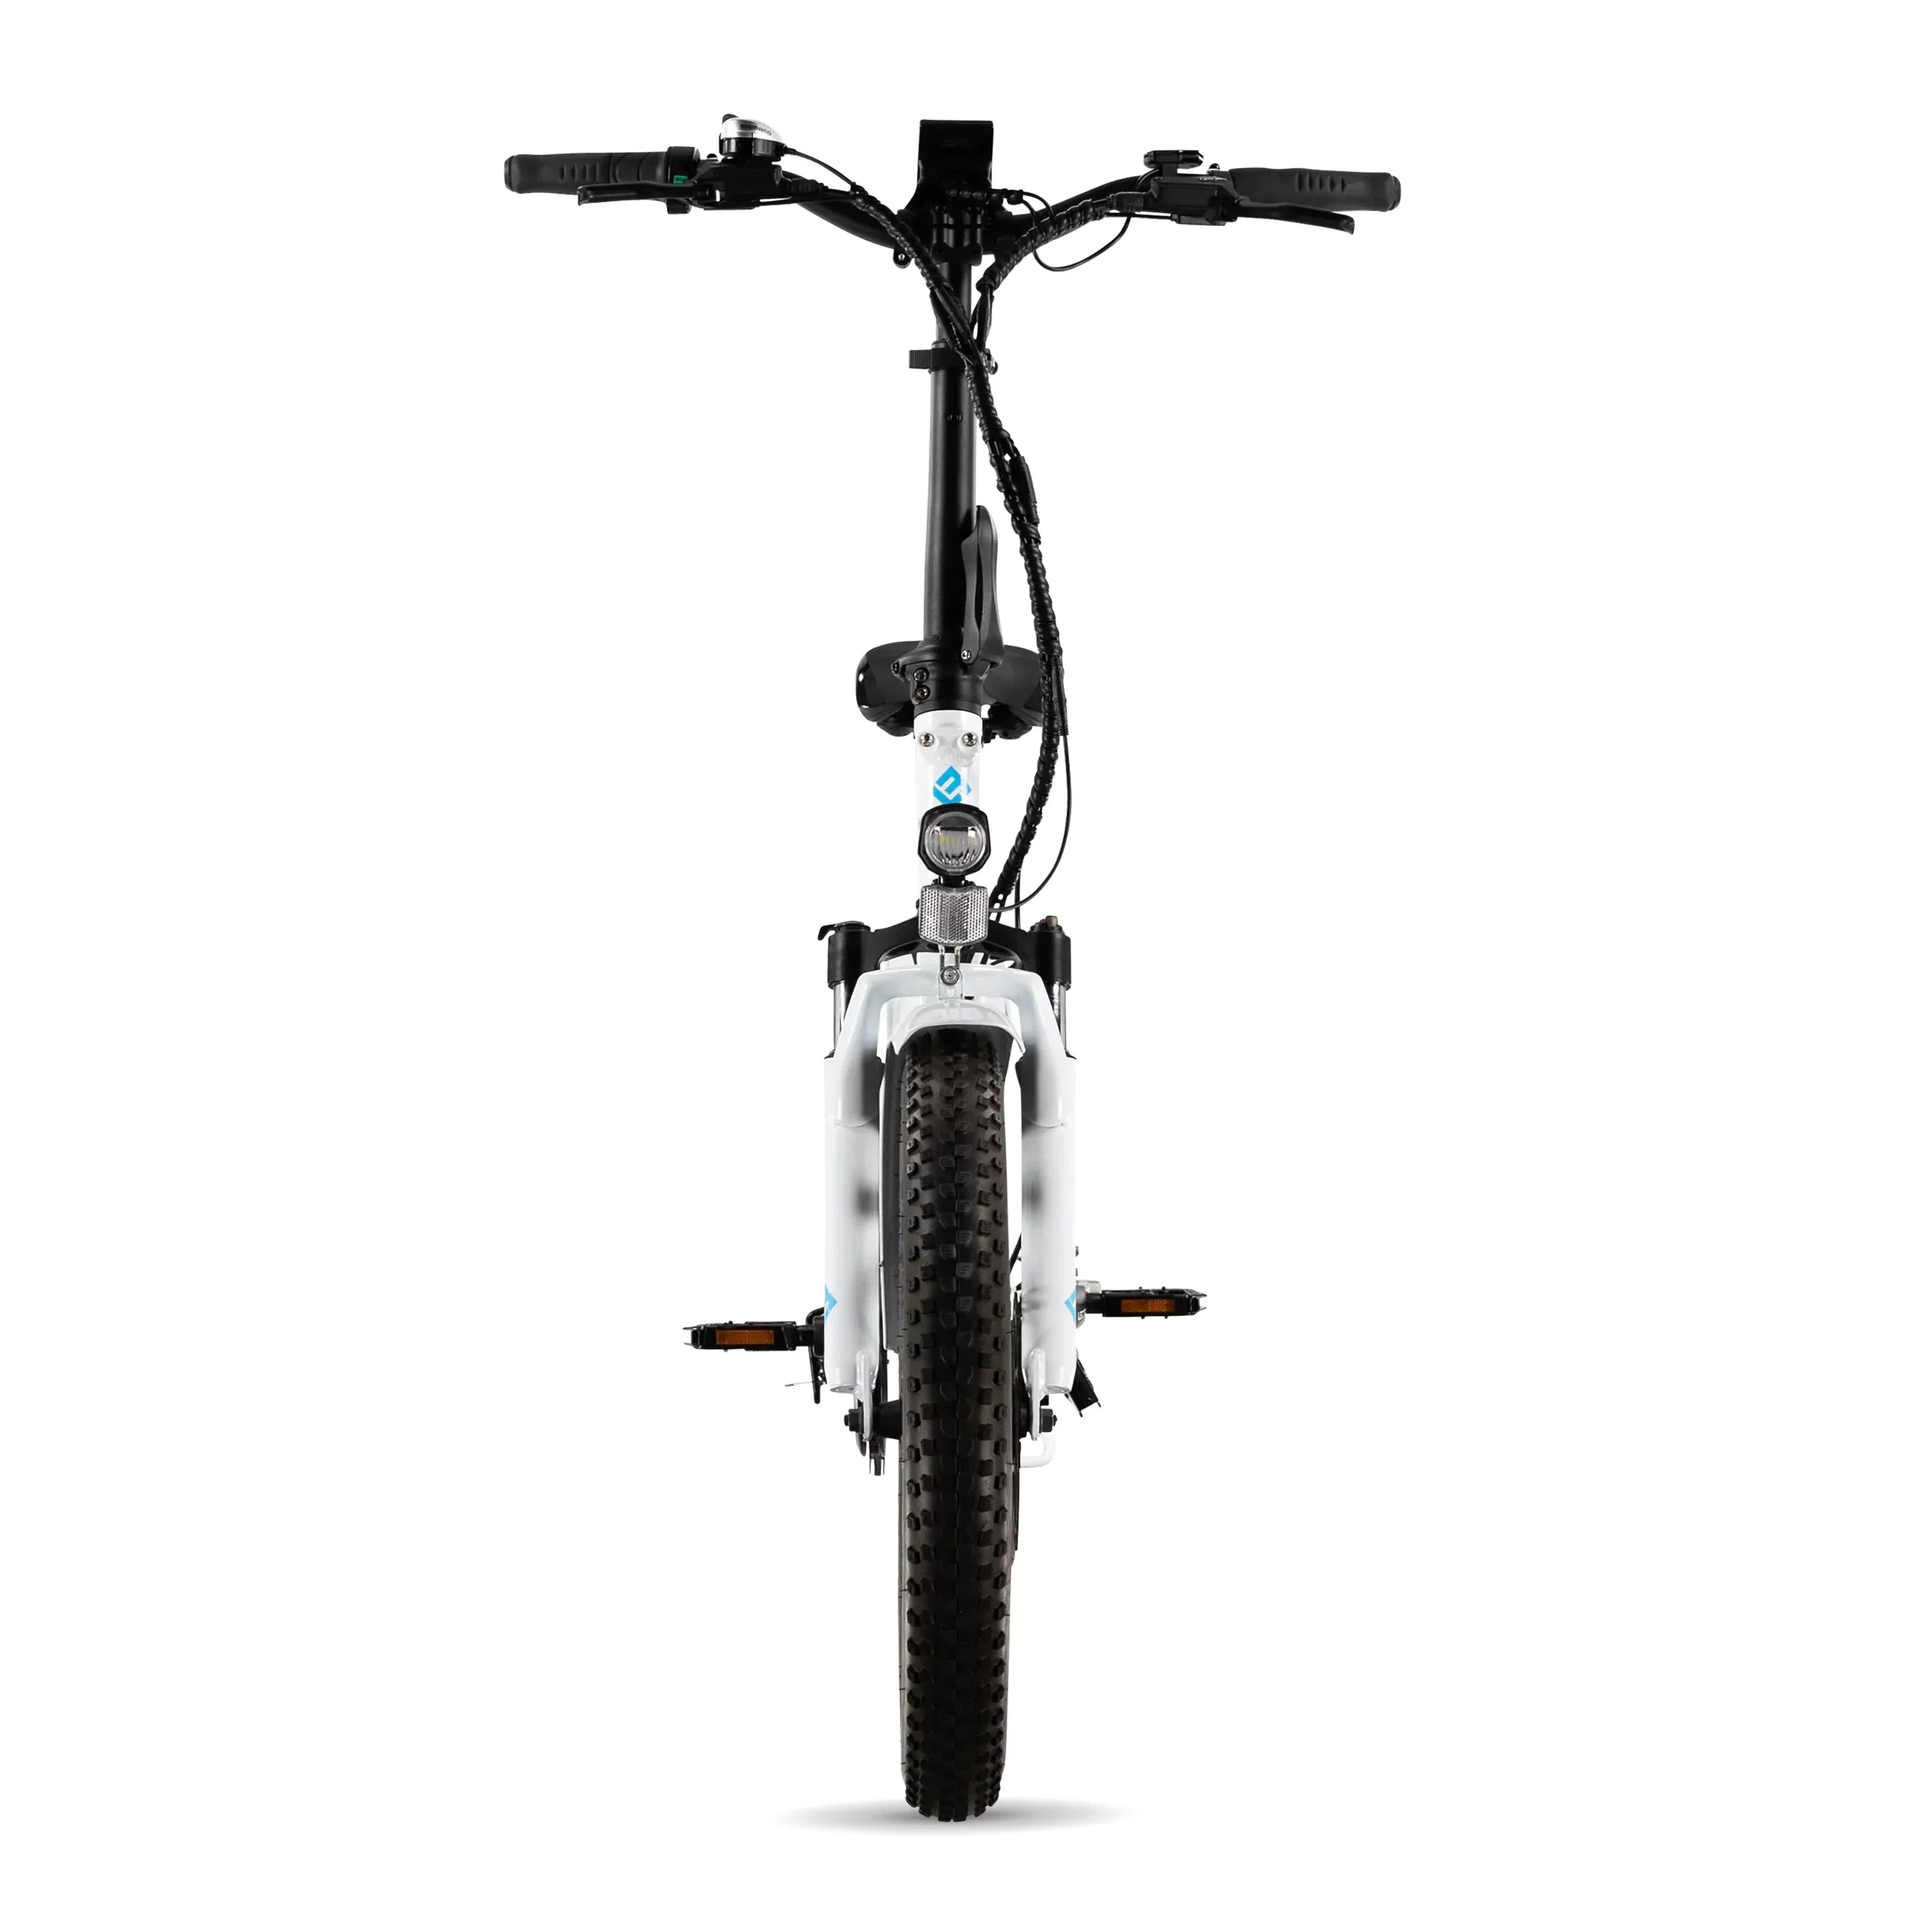 Lectric XP 3.0 eBike Adult Folding Electric Bicycle Black White